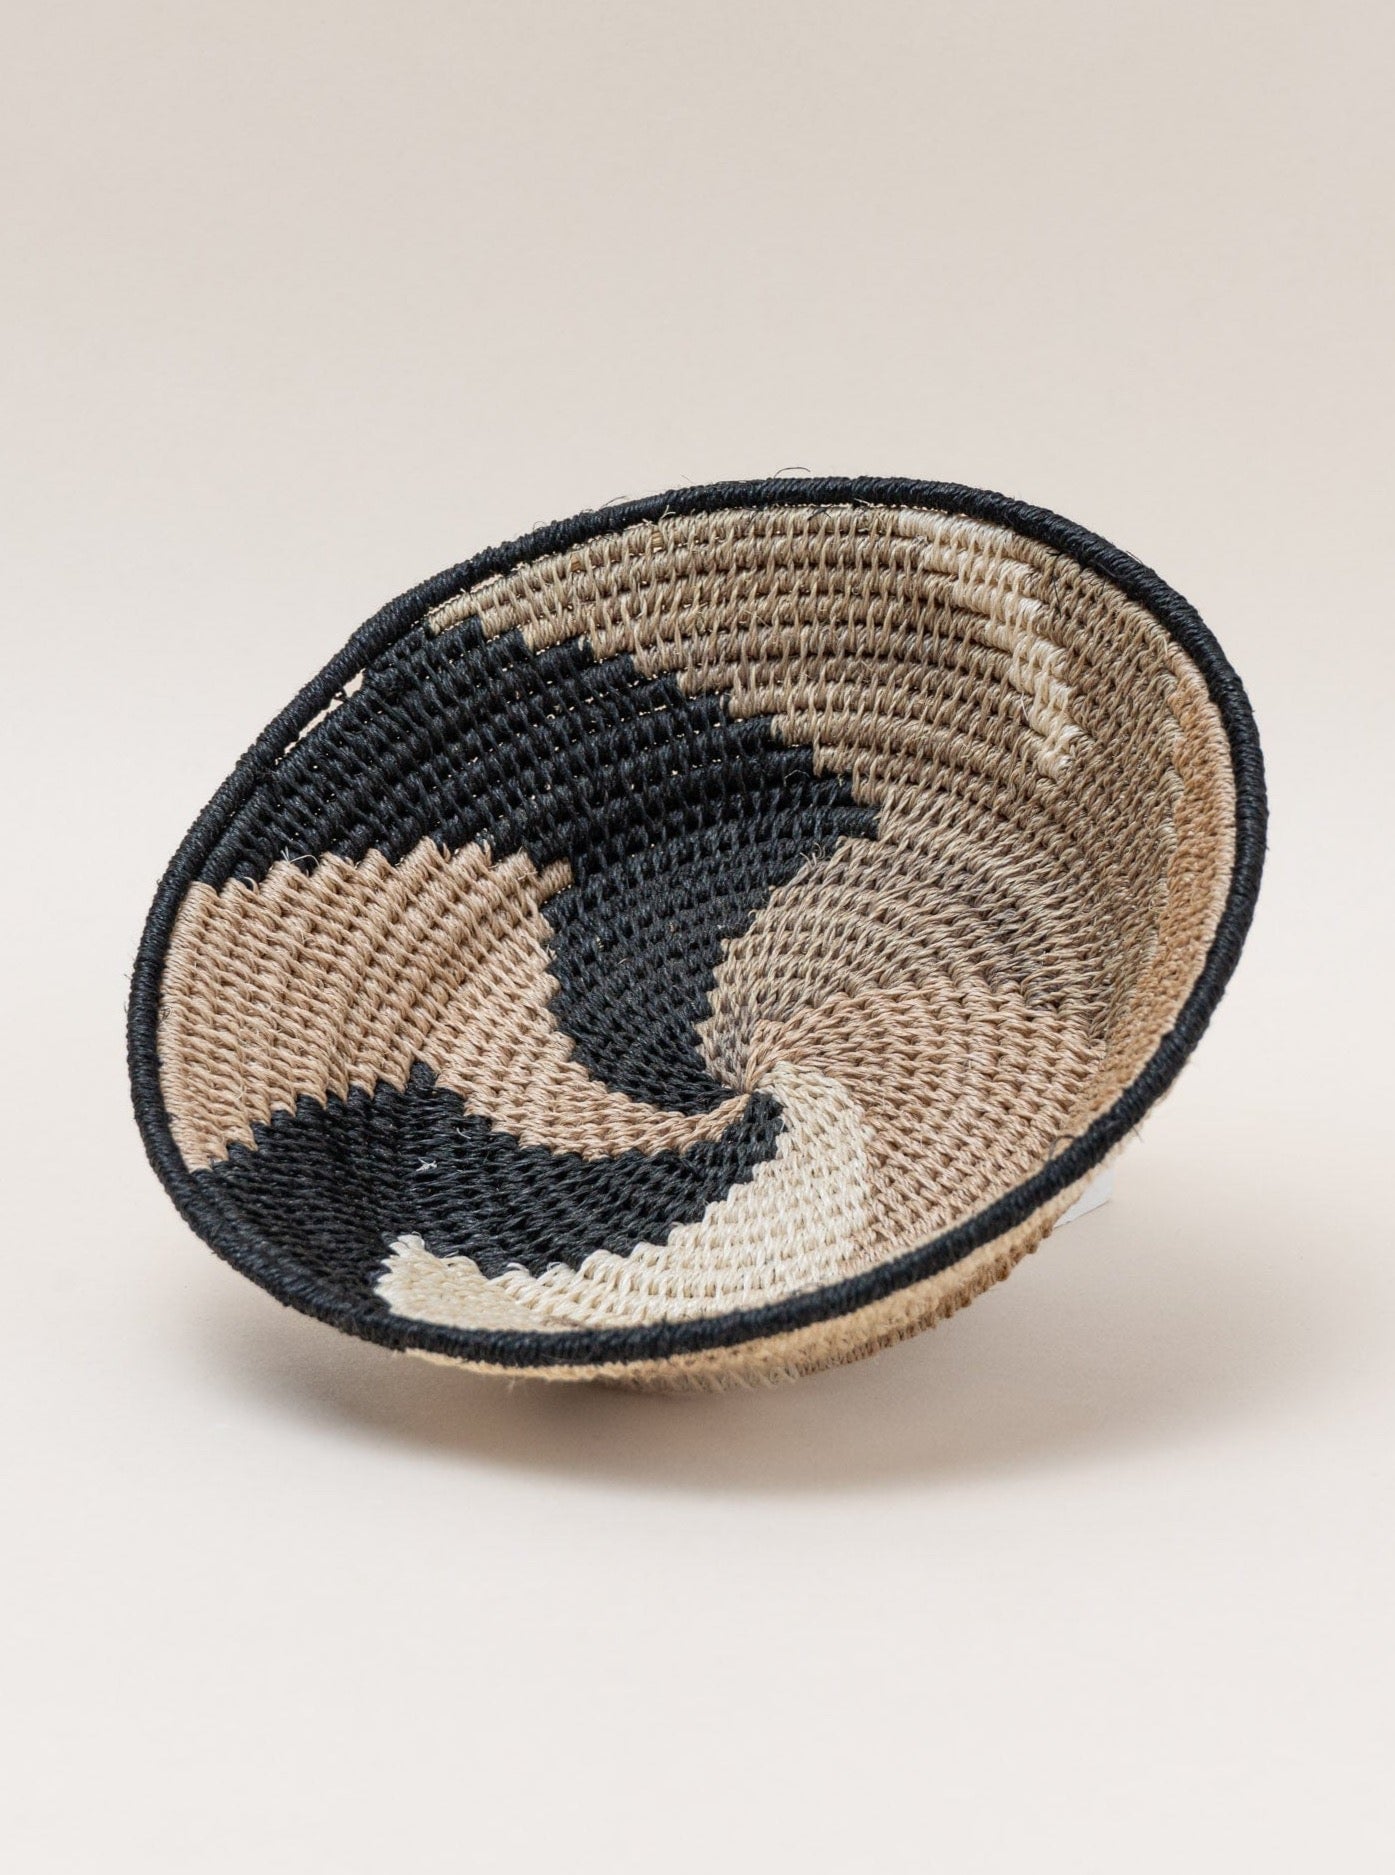 A Handmade Sisal Catchall Basket on a white surface, showcasing Swazi weaving techniques.